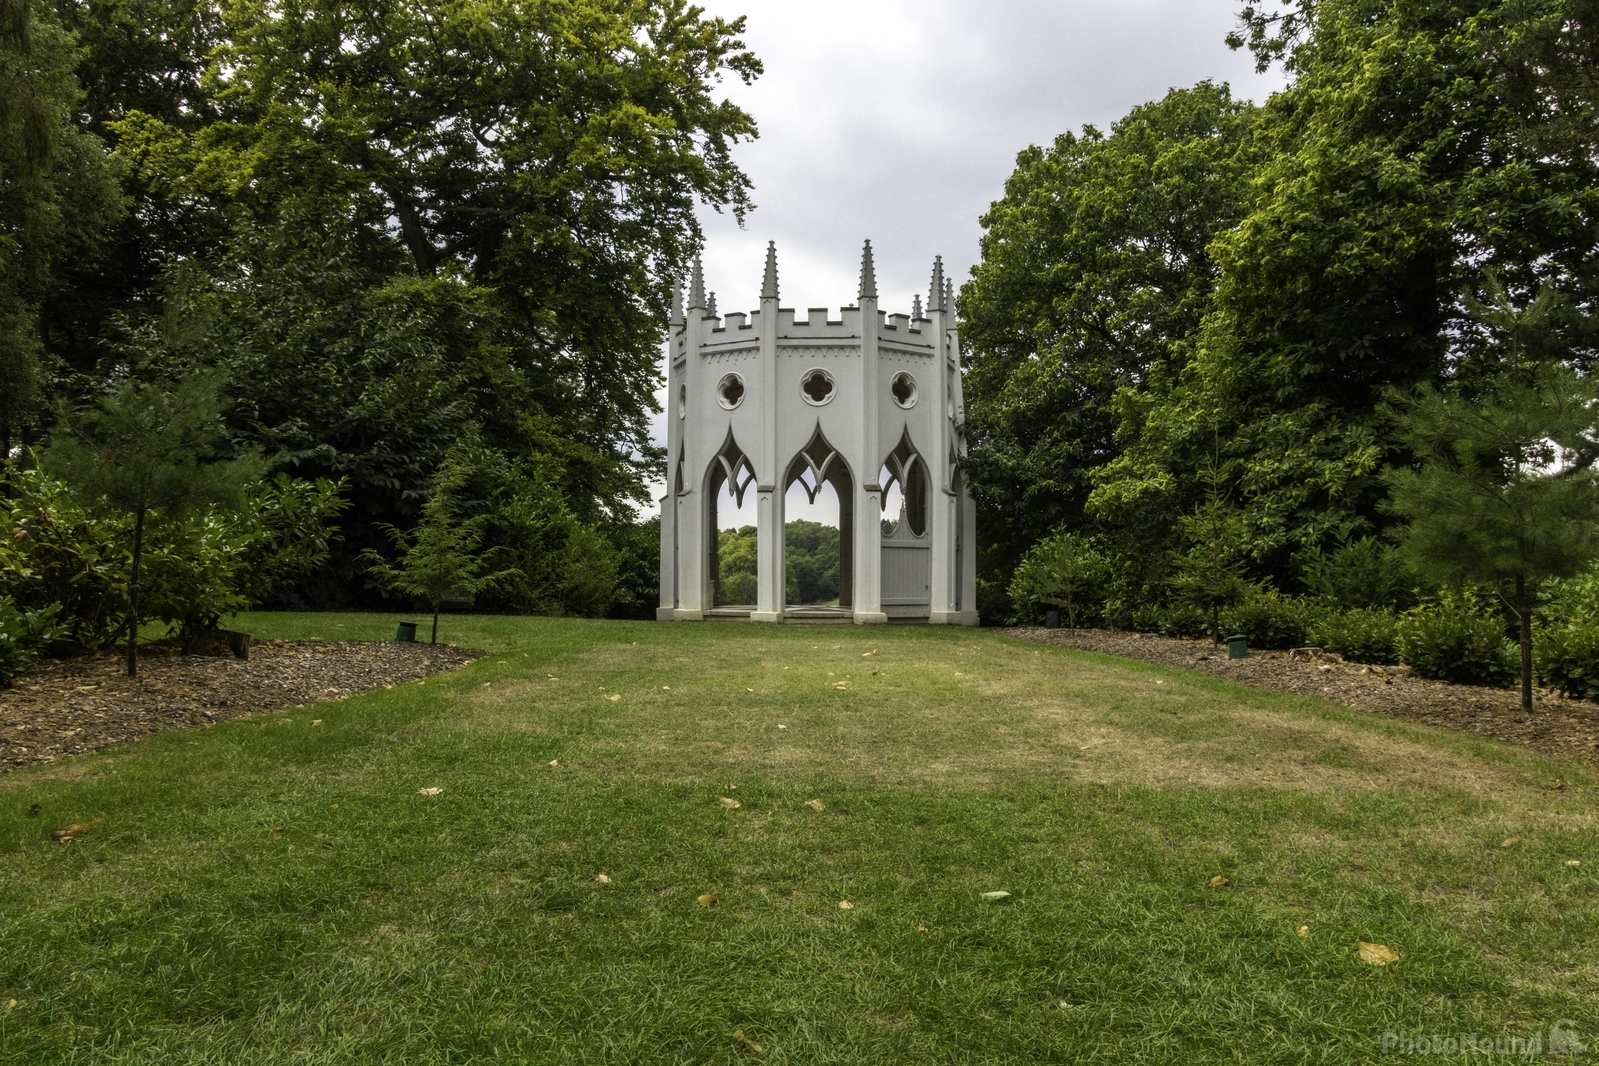 Image of Painshill Park by Amethyst Draakziel